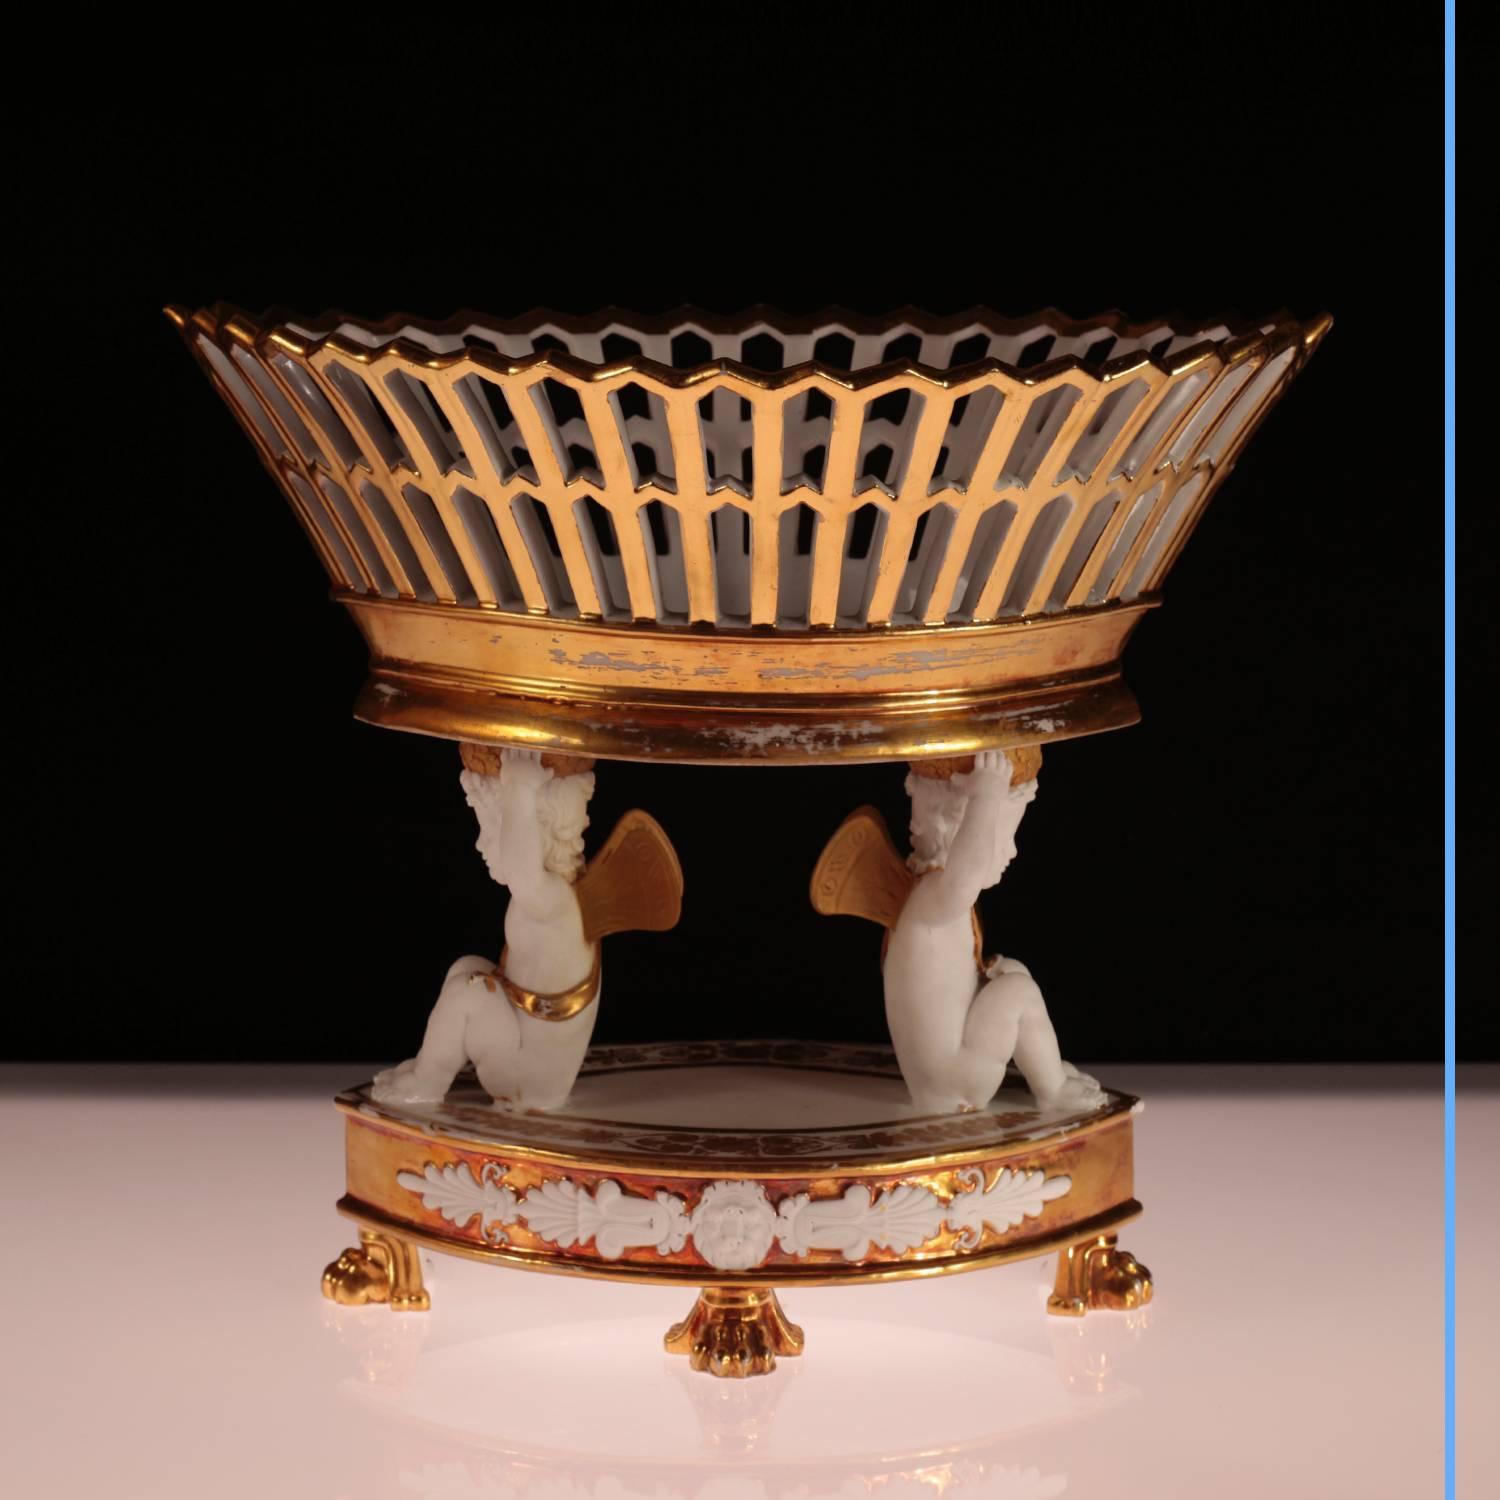 French Restoration Bisque cup with putti
bisque and gilded porcelain,
19th century,
circa 1850.
Measures: H 28 cm, W 36.5 cm, D 23.5 cm.

Our Exhibit: 

Created under the French First Empire, the fashion of fruit and “sweetness” baskets